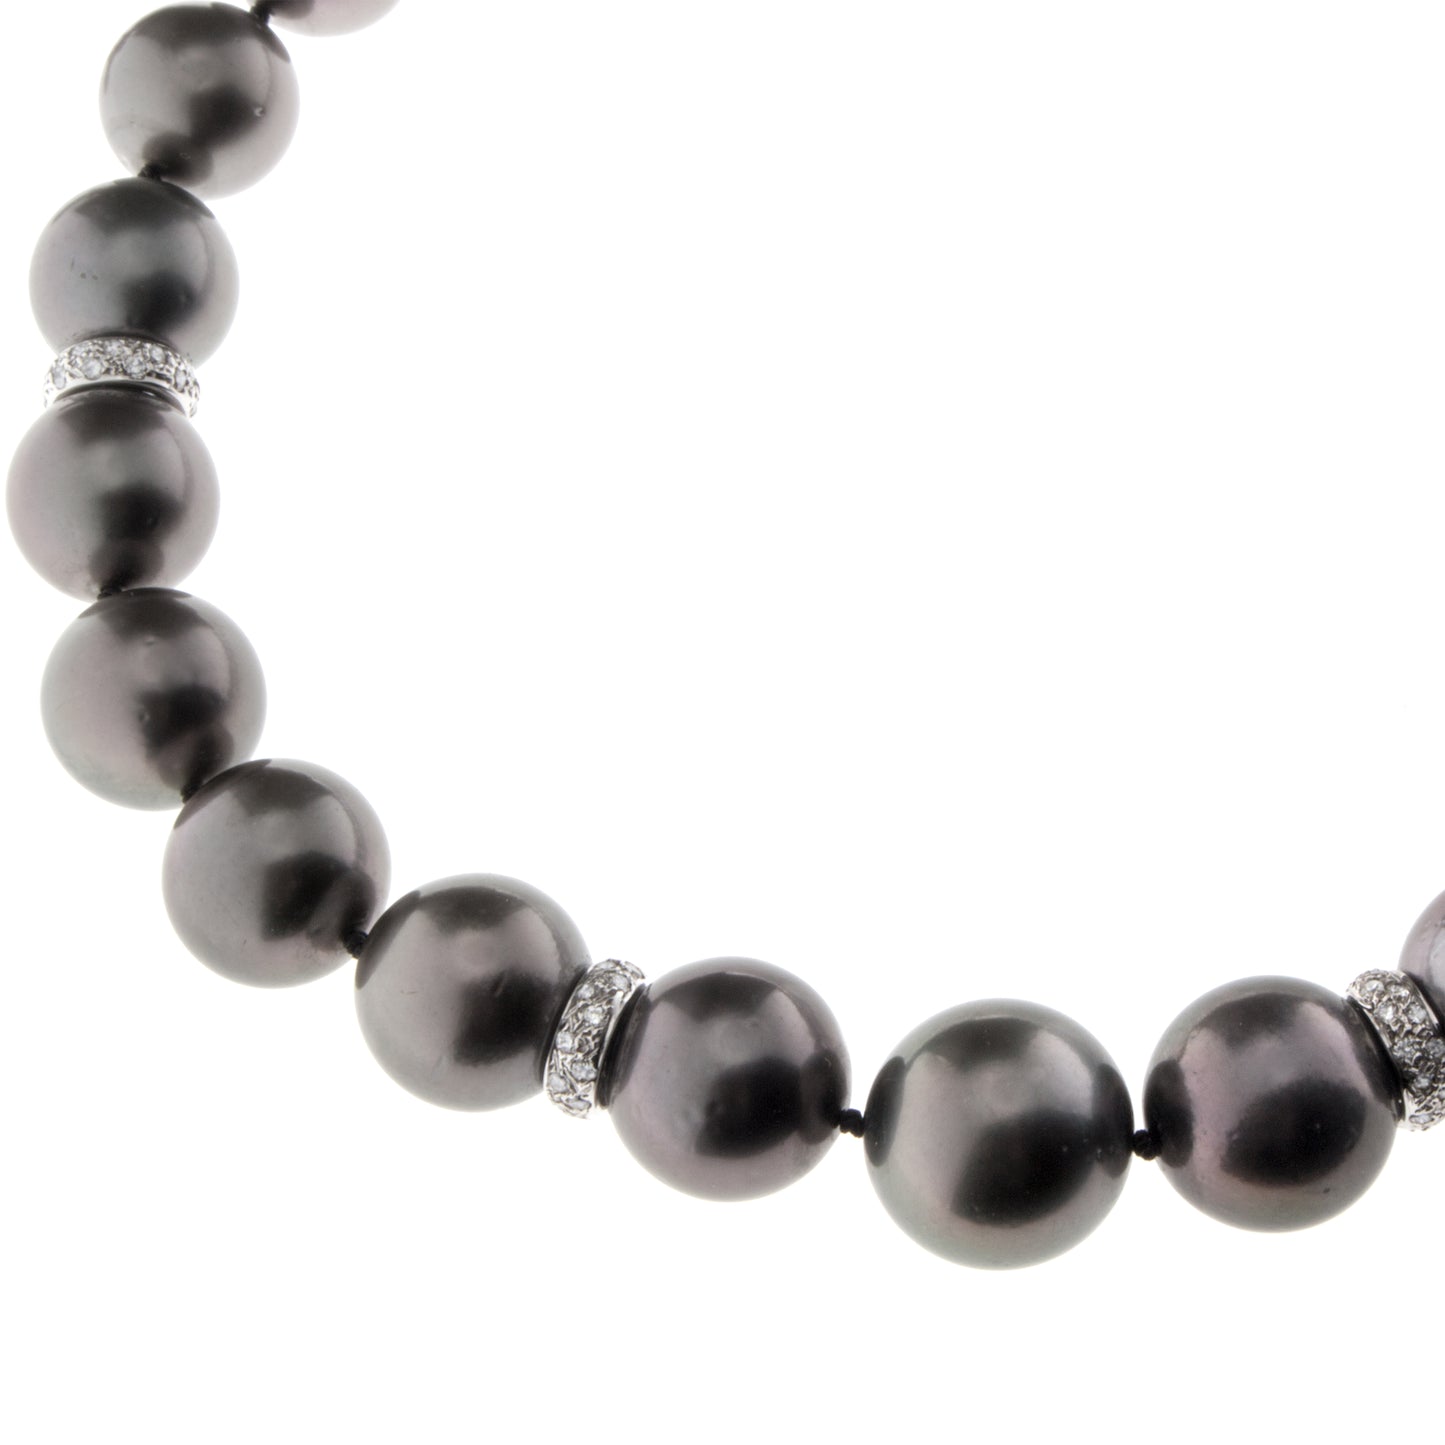 Tahitian Black Pearl Necklace with Four Diamond Rondelle and 14K White Gold Catch. Pearl and Rondelle Closed View